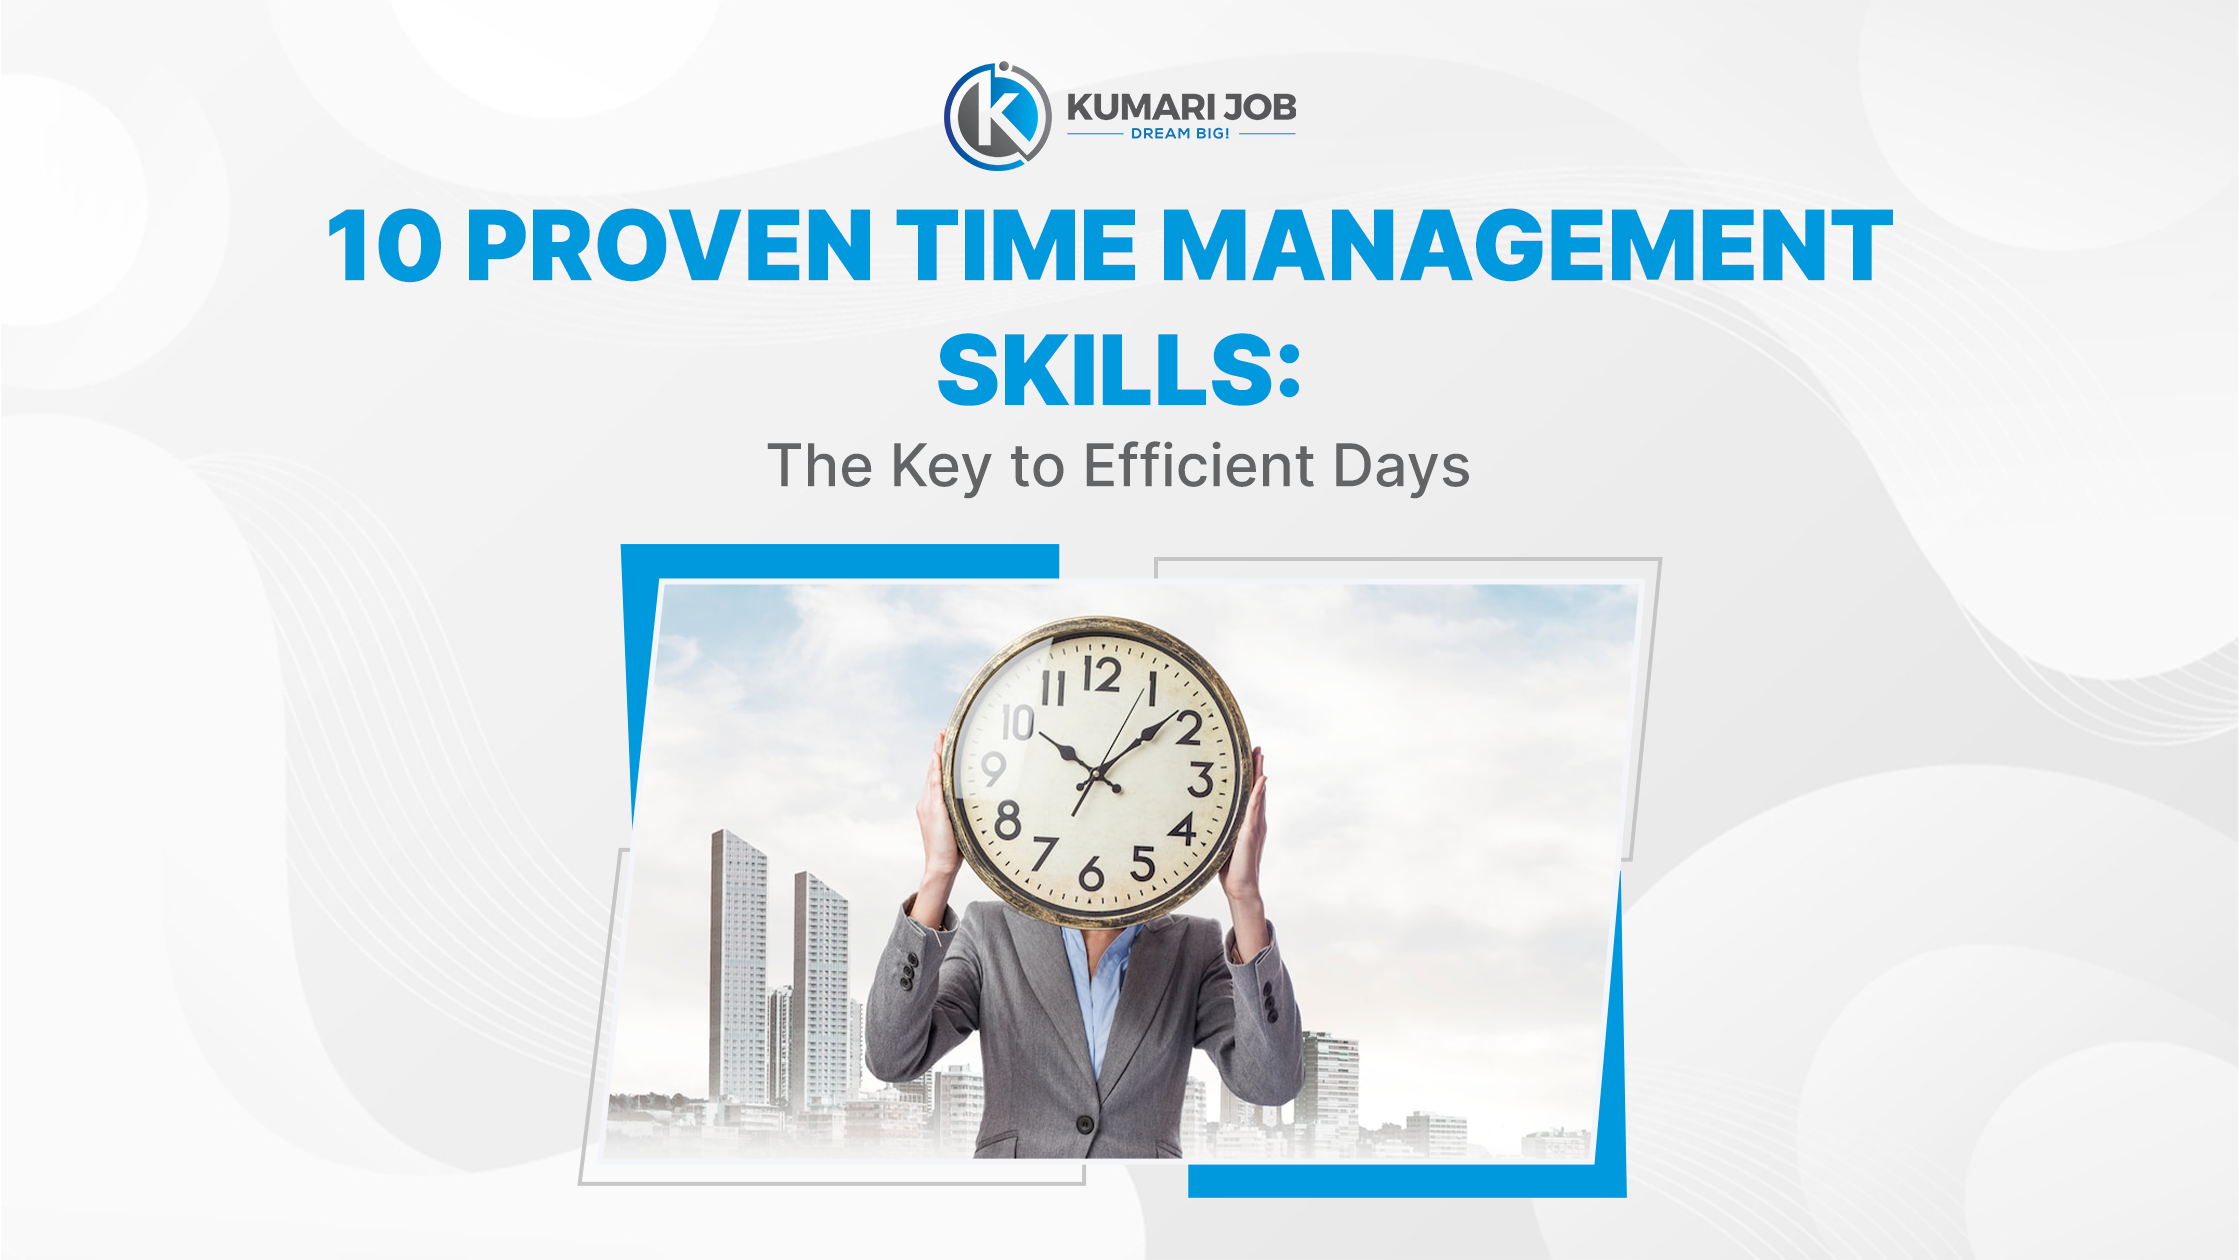 Benefits of time management